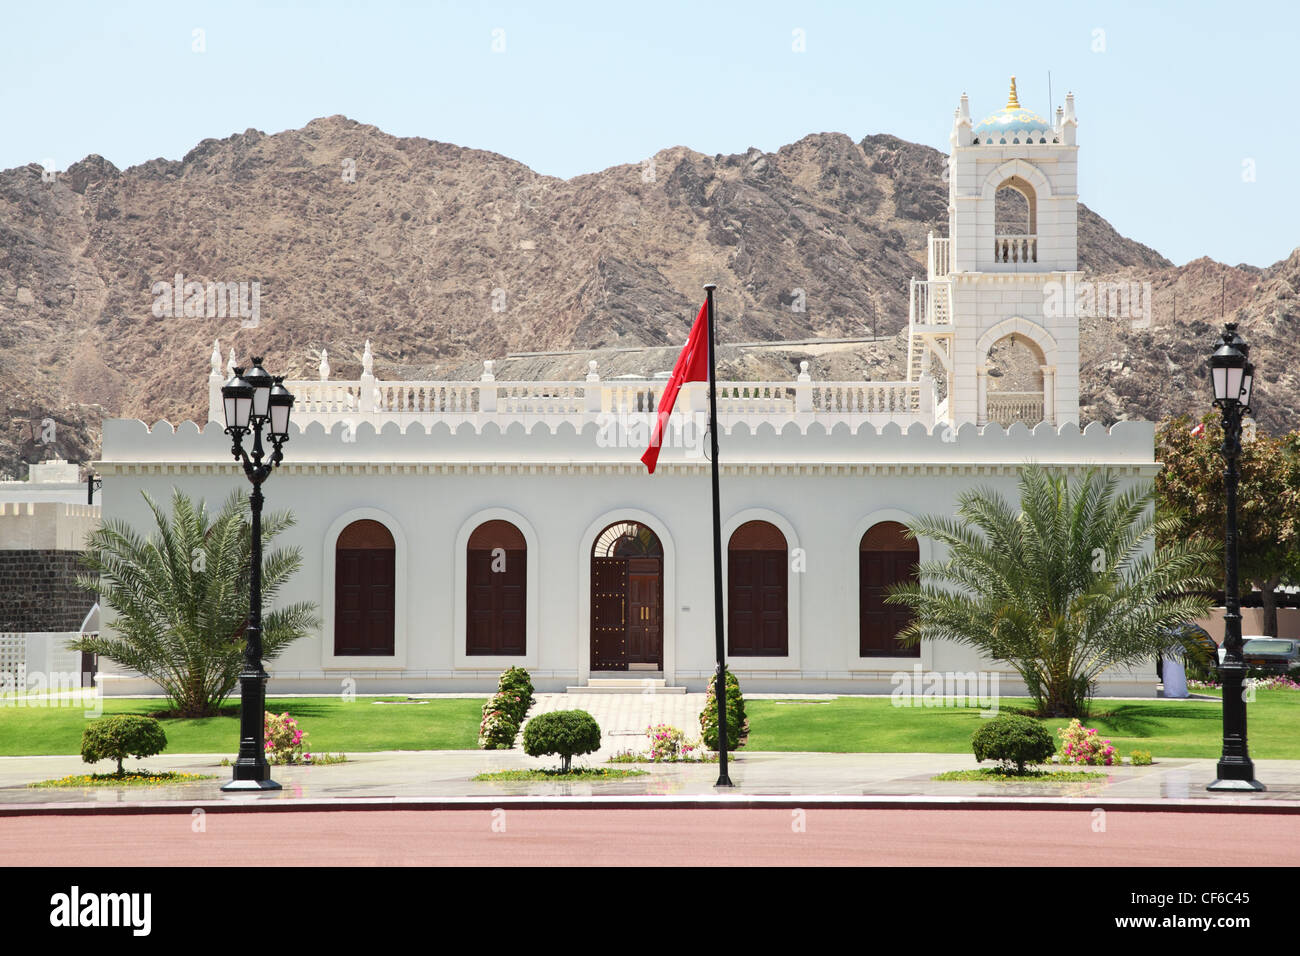 building inside Sultan's Palace in Oman. Flag in center of image. Stock Photo